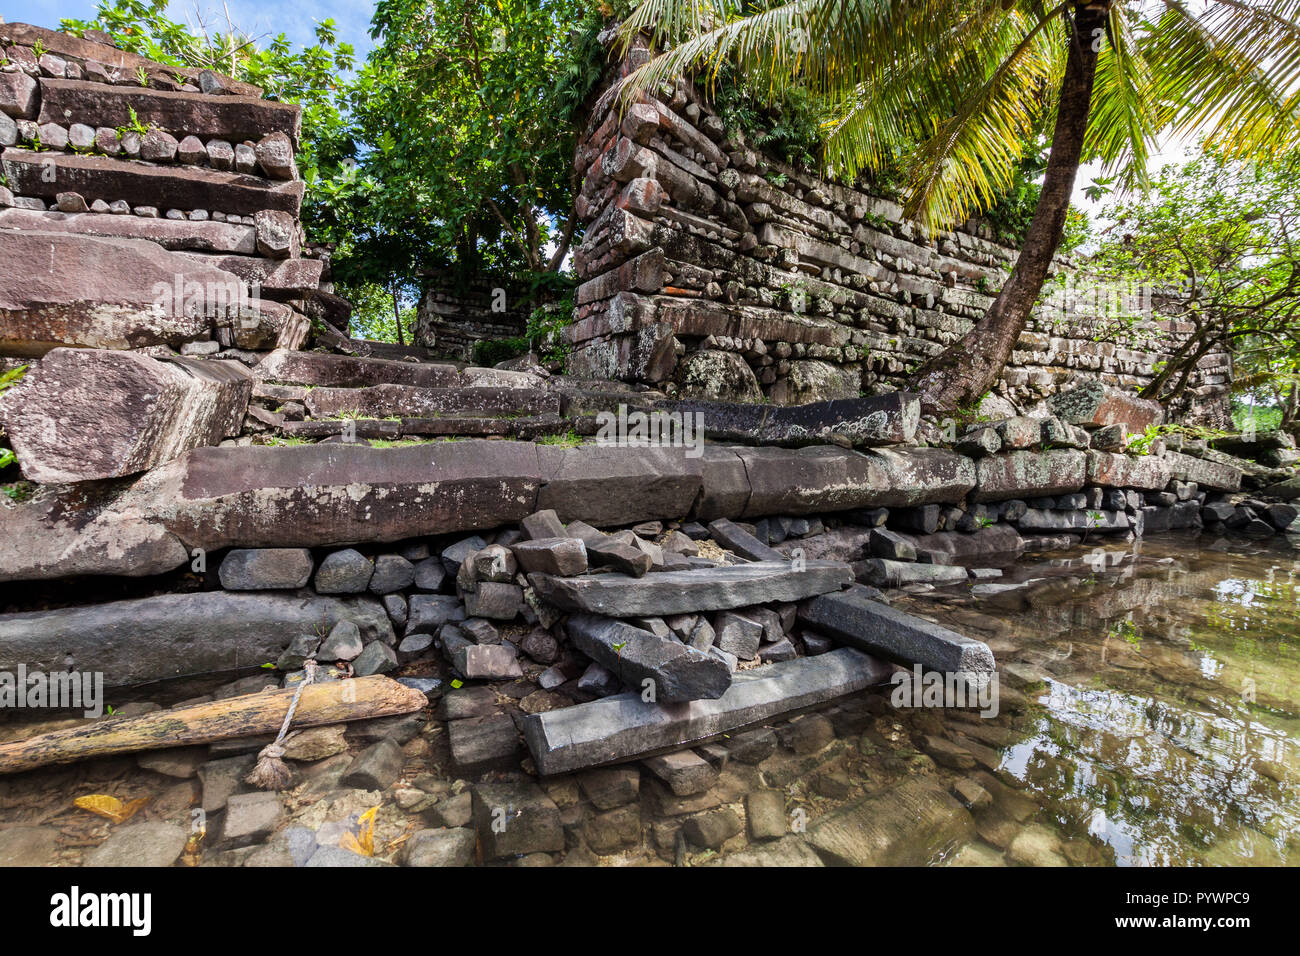 Main gates to the walls of Nan Madol - prehistoric ruined stone city built of basalt slabs on islands and canals, overgrown with palms. Pohnpei, Micronesia, Oceania Stock Photo